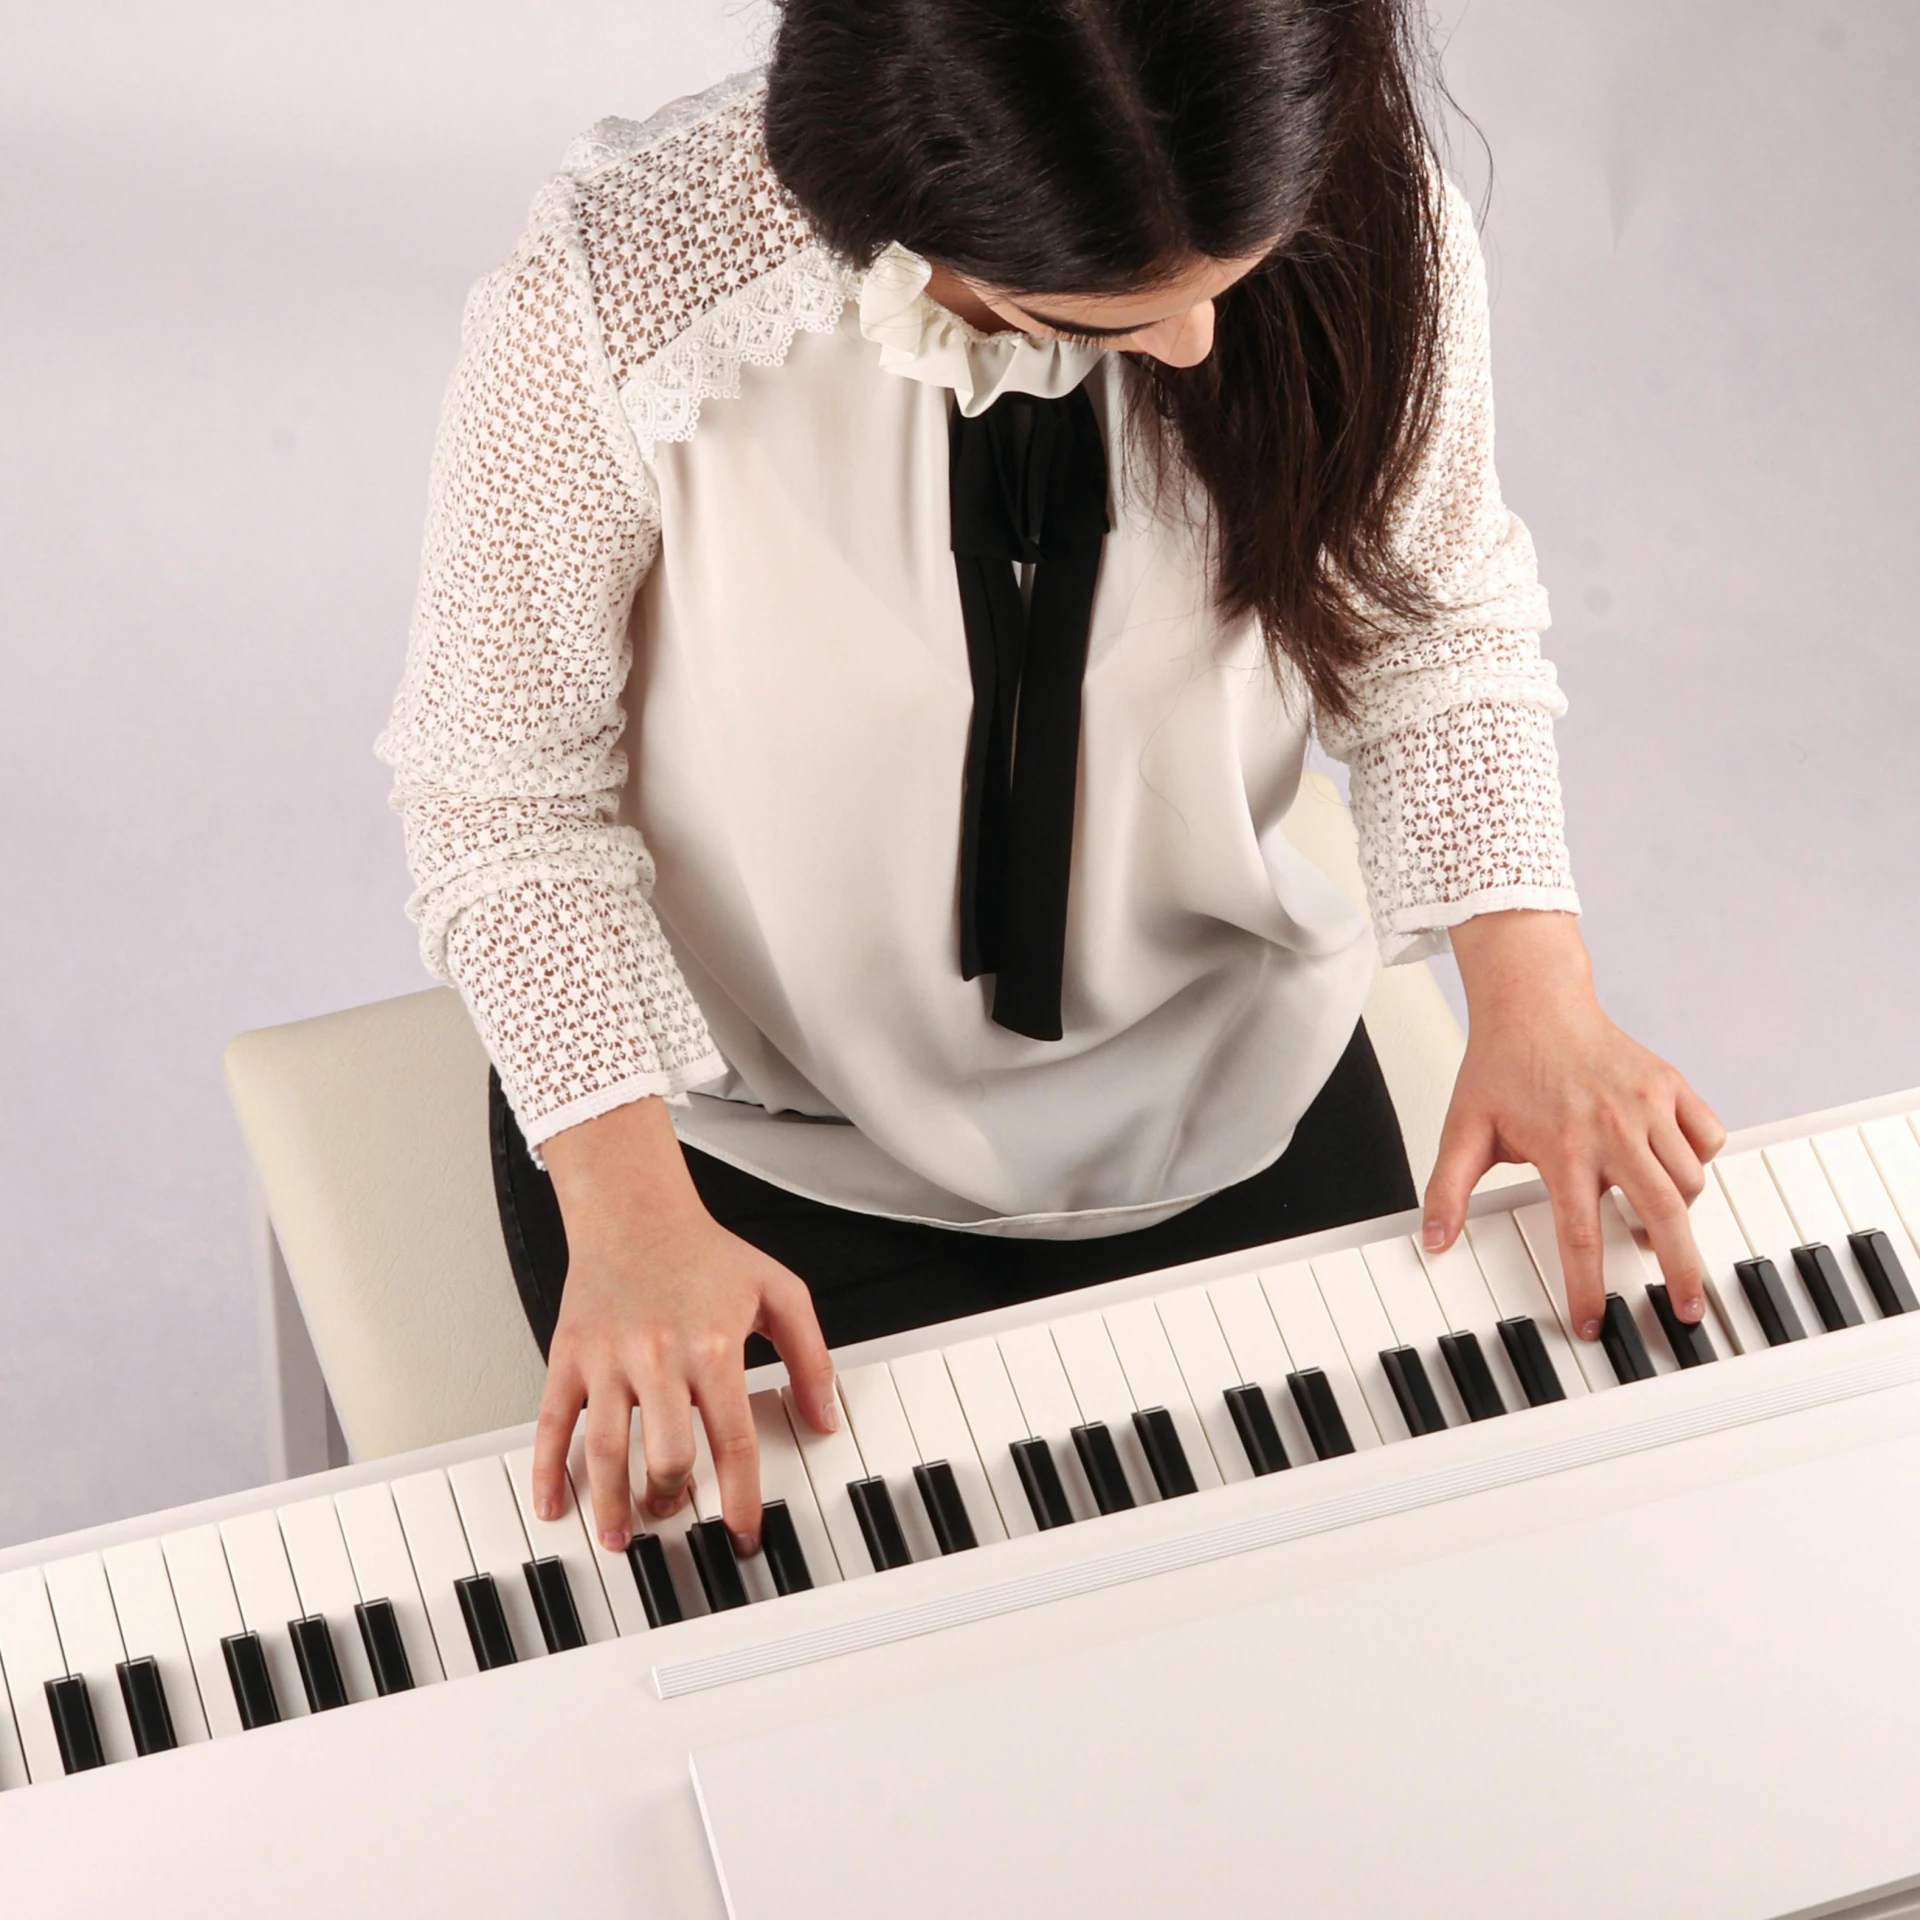 a woman in a white shirt is playing the piano, inspired by Kawai Gyokudō, mechanical keyboard, with a white background, student, wide overhead shot